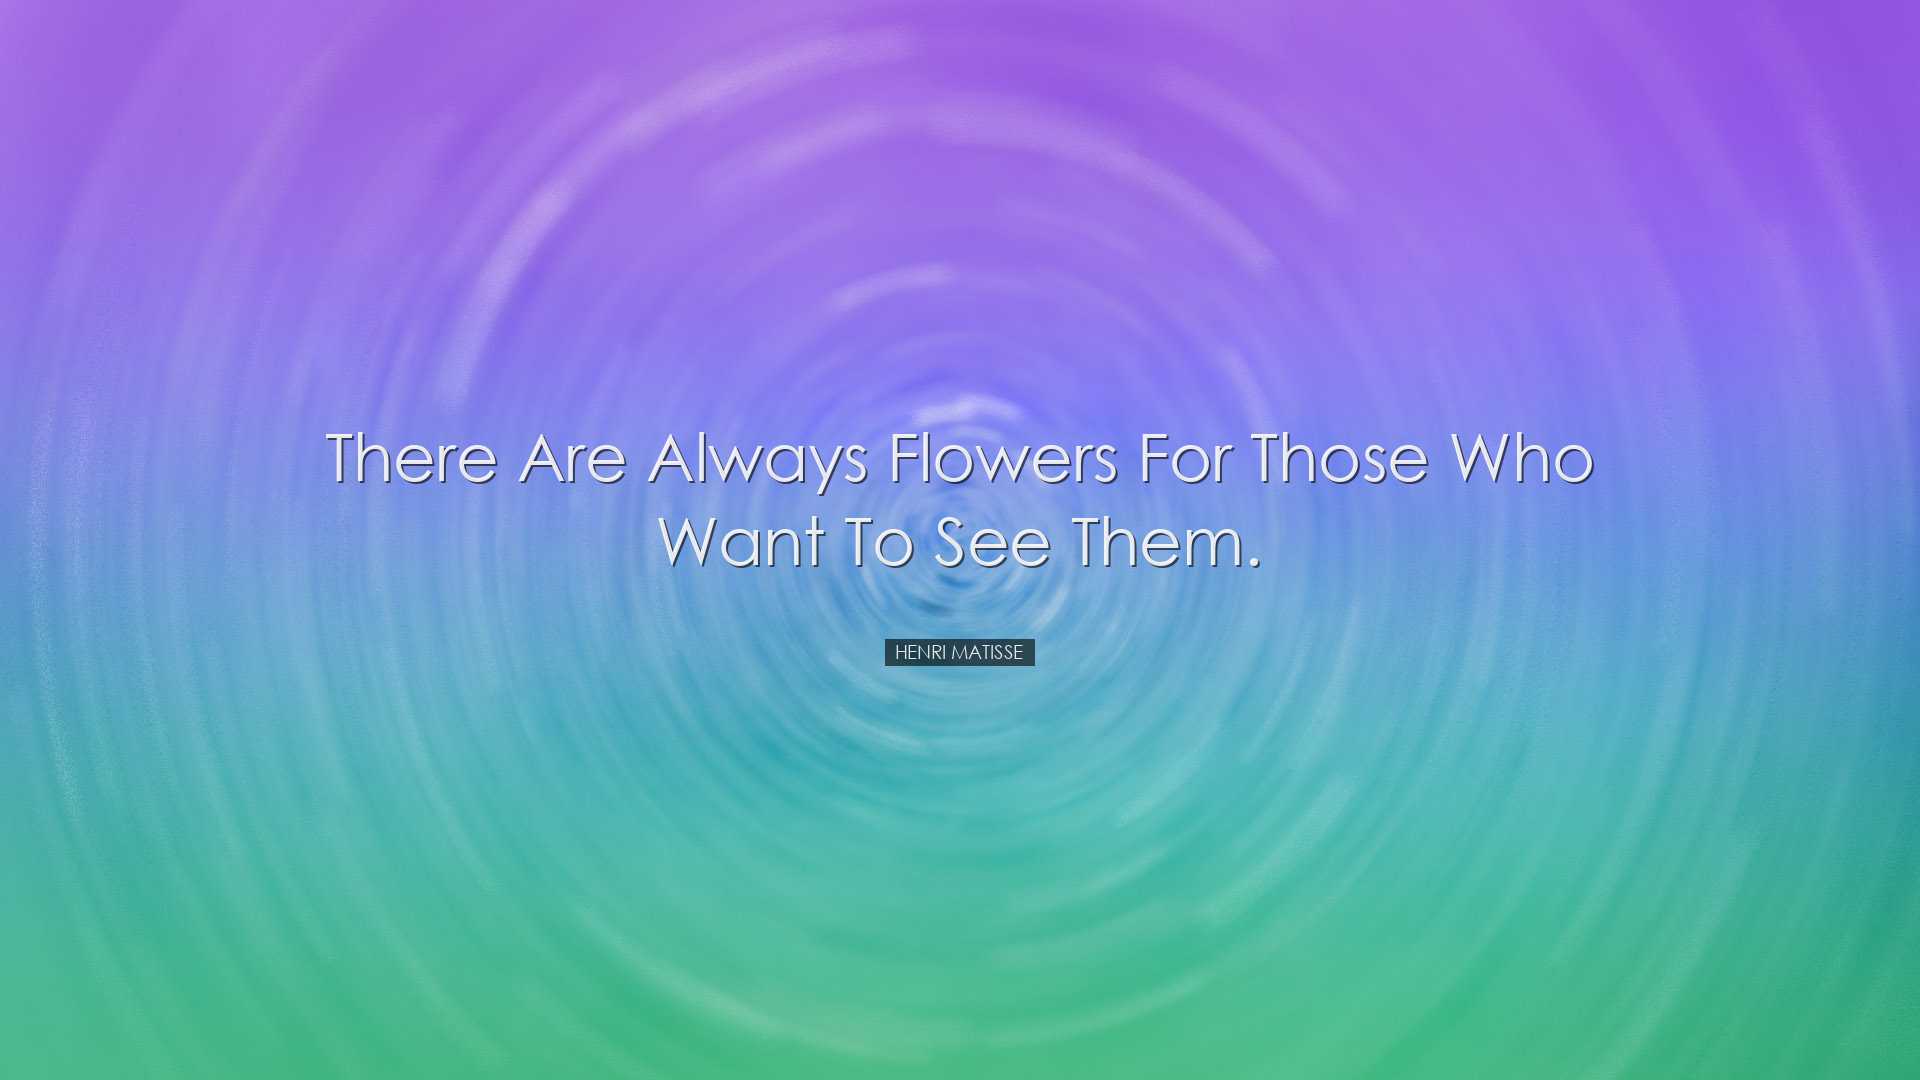 There are always flowers for those who want to see them. - Henri M